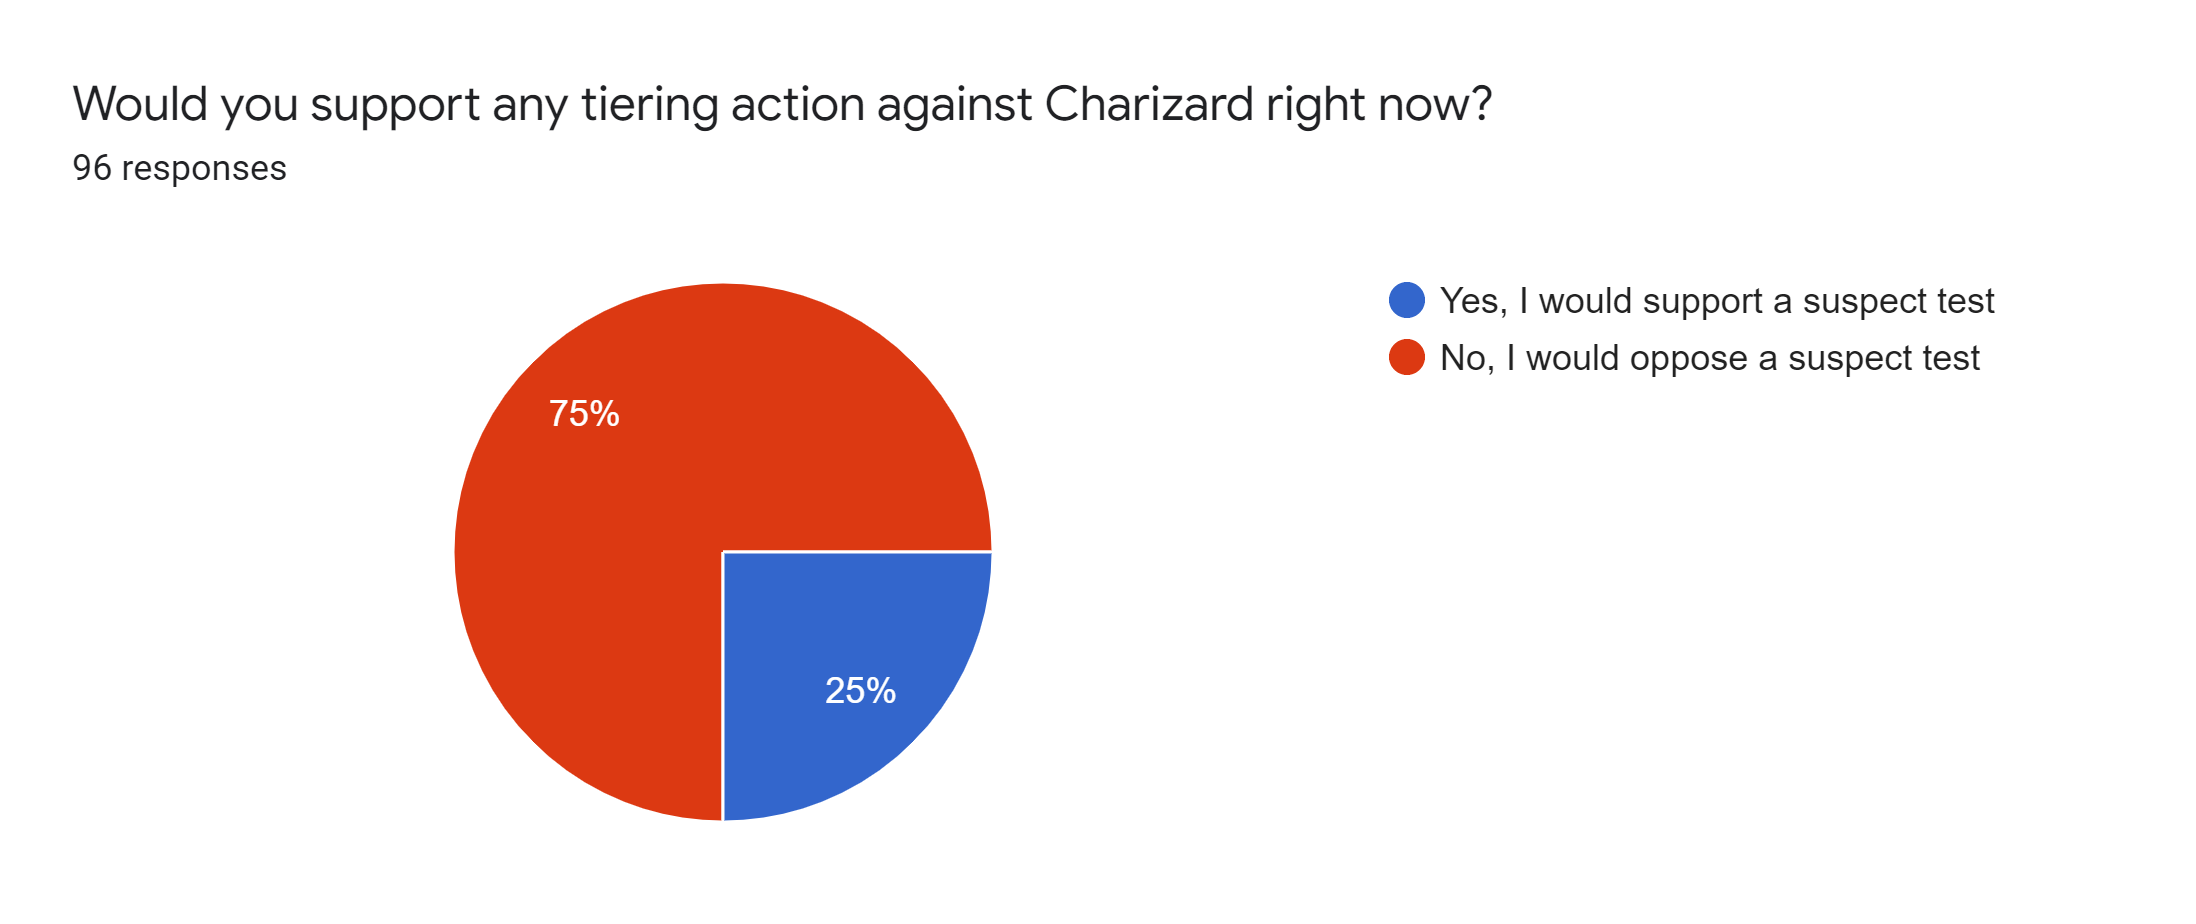 Forms response chart. Question title: Would you support any tiering action against Charizard right now?. Number of responses: 96 responses.